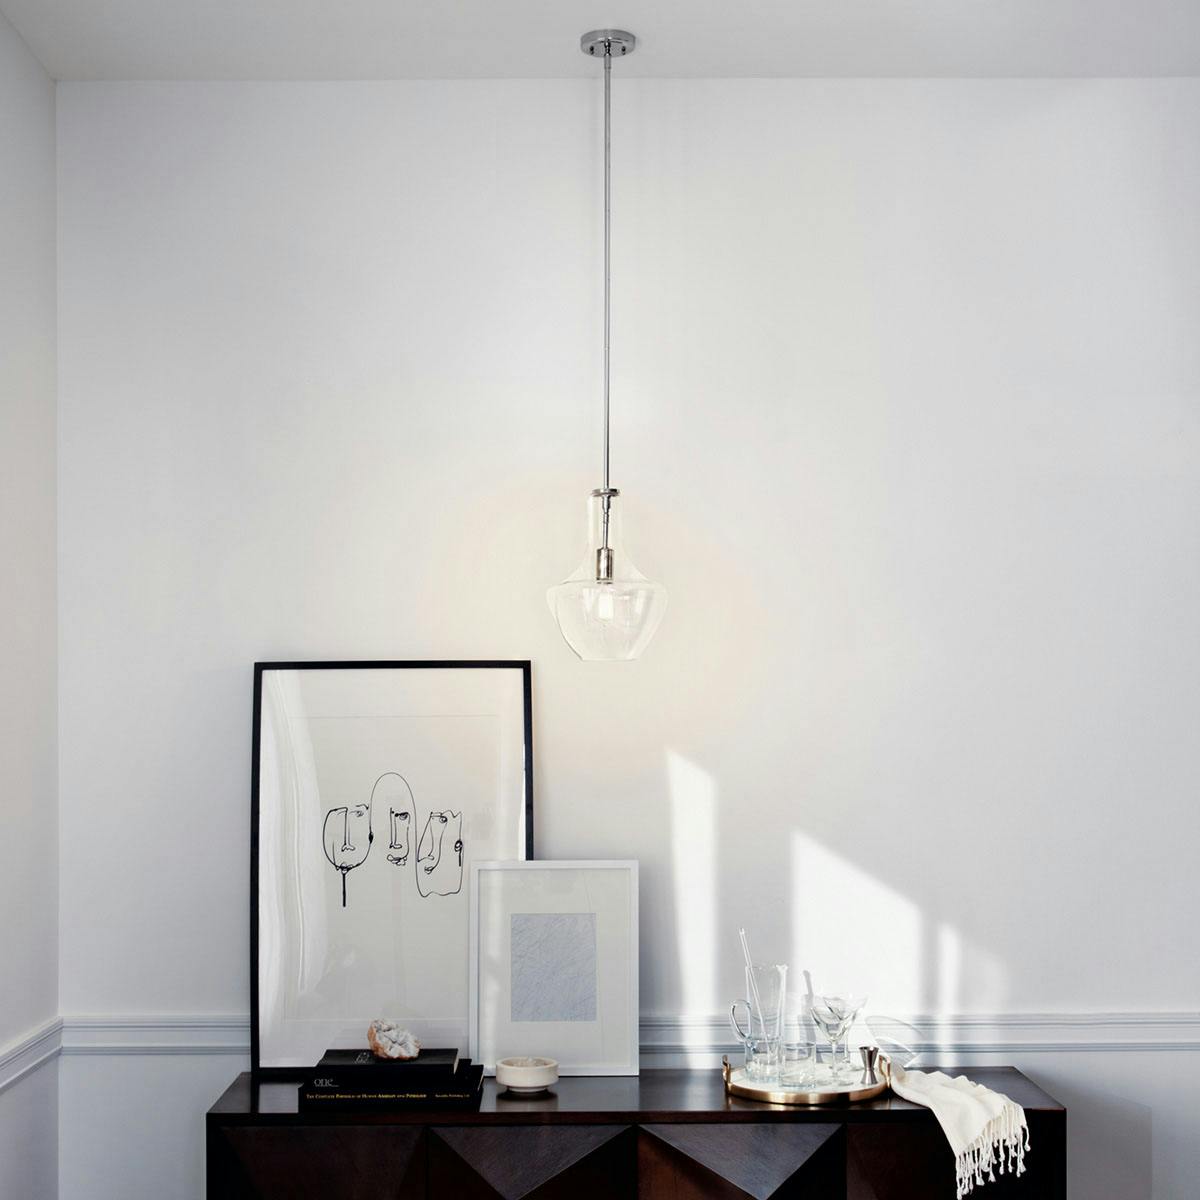 Day time Hallway image featuring Everly pendant 42141CHCLR